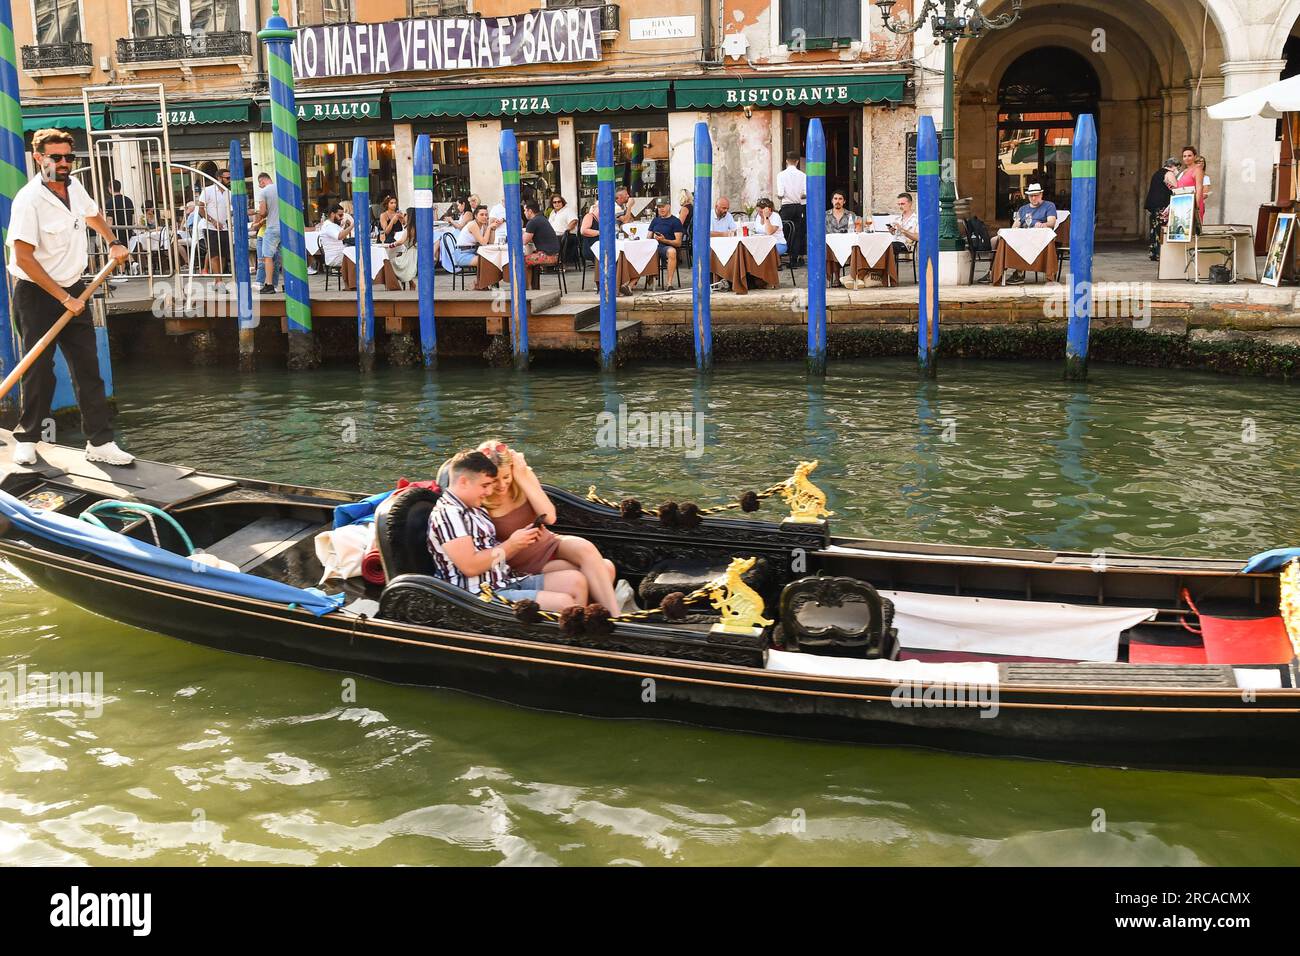 A young couple enjoying their gondola ride on the Grand Canal with a banner against the mafia in Venice on a palace on Riva del Vin waterfront, Italy Stock Photo